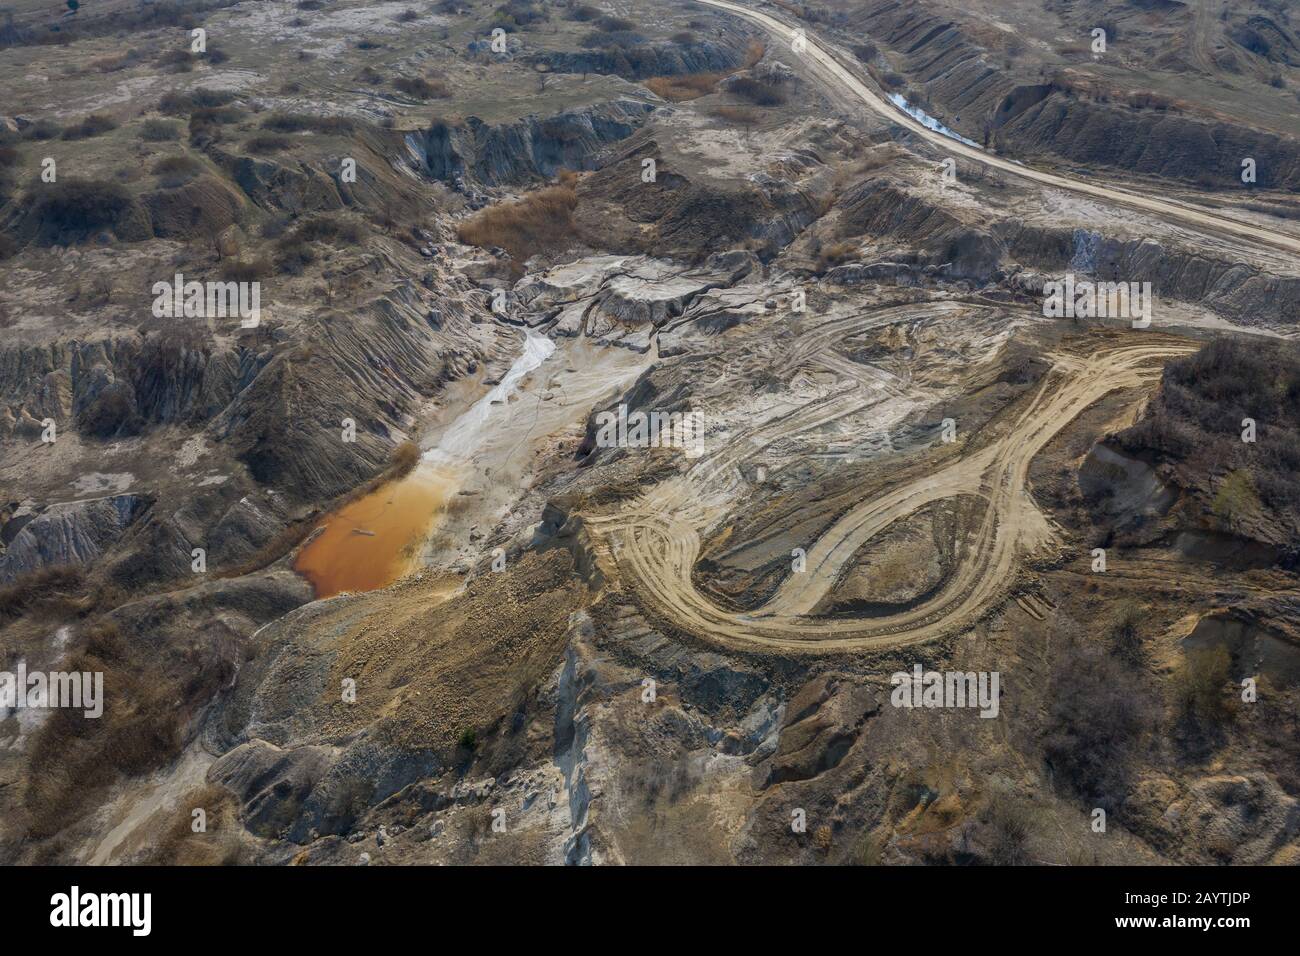 Aerial view of an open mine pit. Exploitation and nature pollution Stock Photo